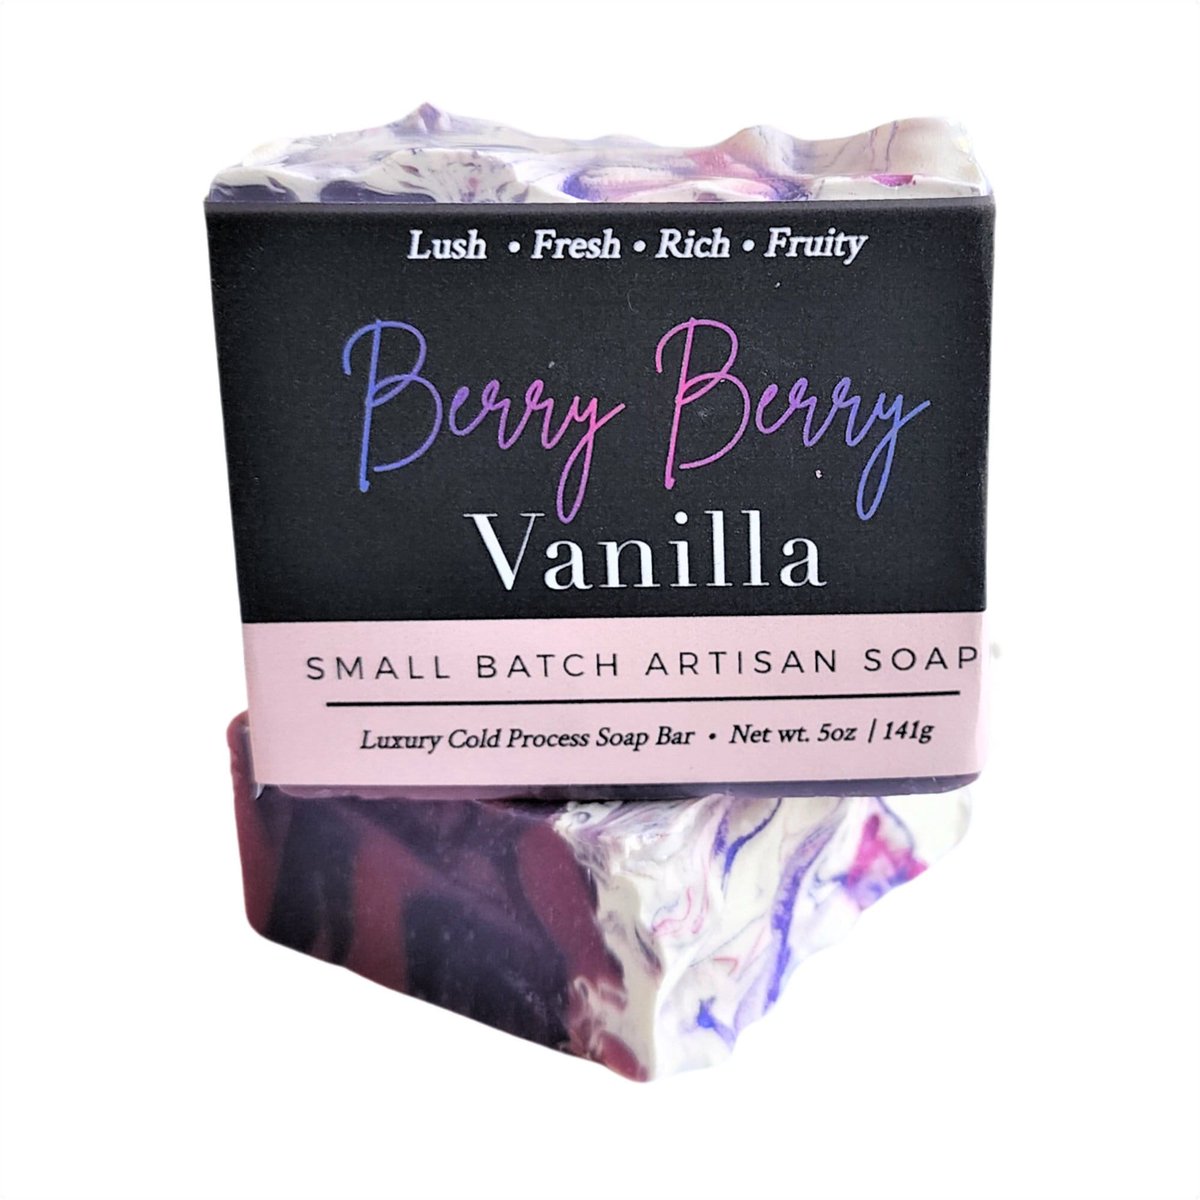 Berry Berry Vanilla Soap, Handmade Soap, Vegan Soap, Black Raspberry Soap, Strawberry Soap, Vanilla Soap, Natural Soap, Best Selling Soap tuppu.net/496eb157 #selfcare #vegan #shopsmall #gifts #soap #DeShawnMarie #Soapgift #Christmasgifts #SoapFavors